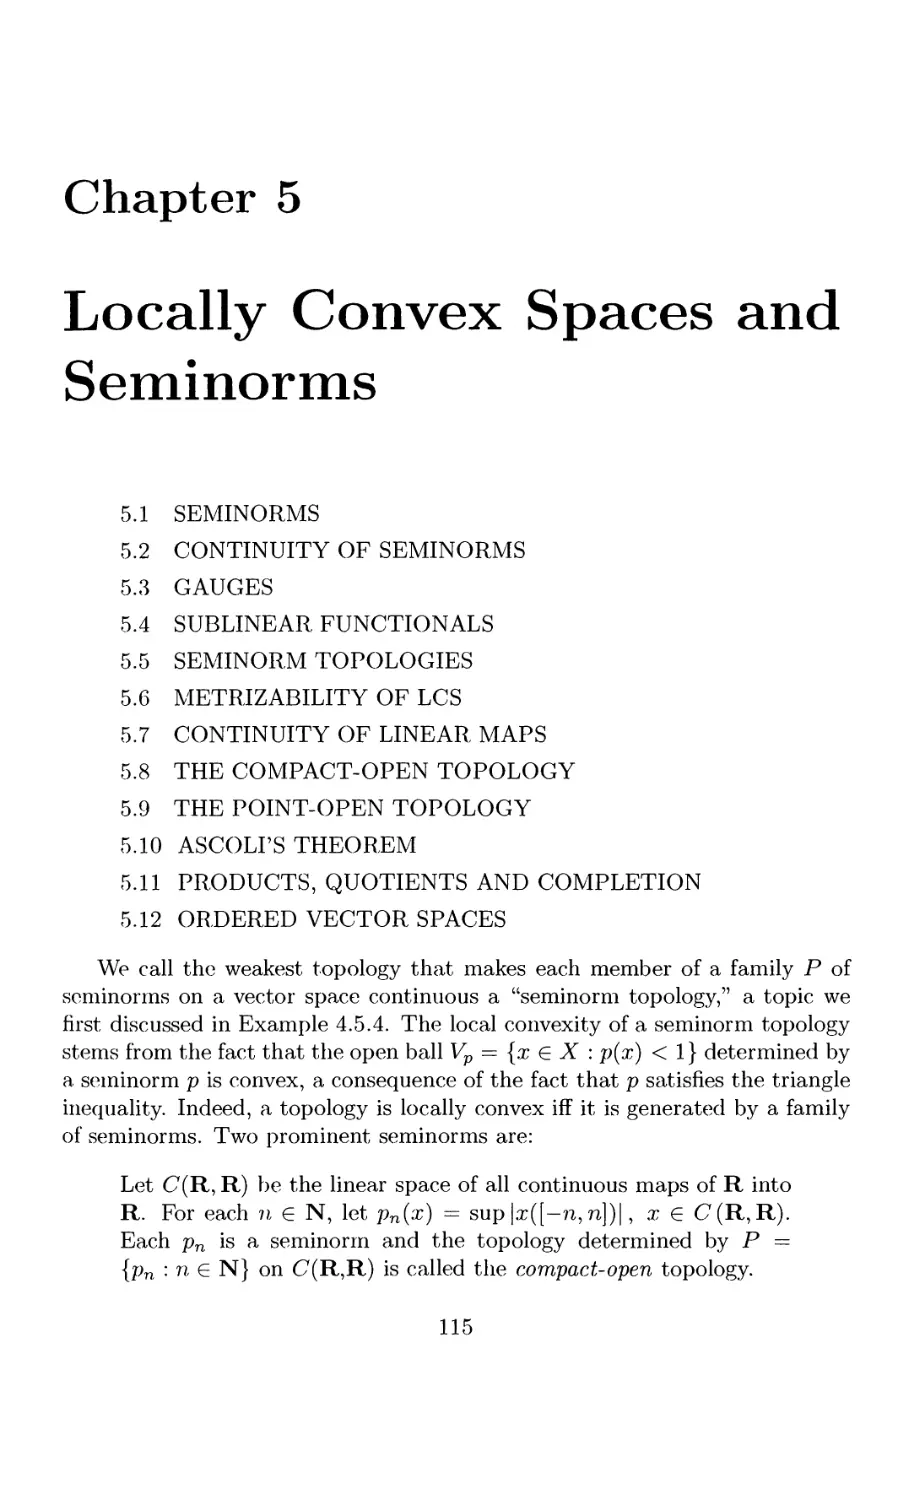 5 Locally Convex Spaces and Seminorms